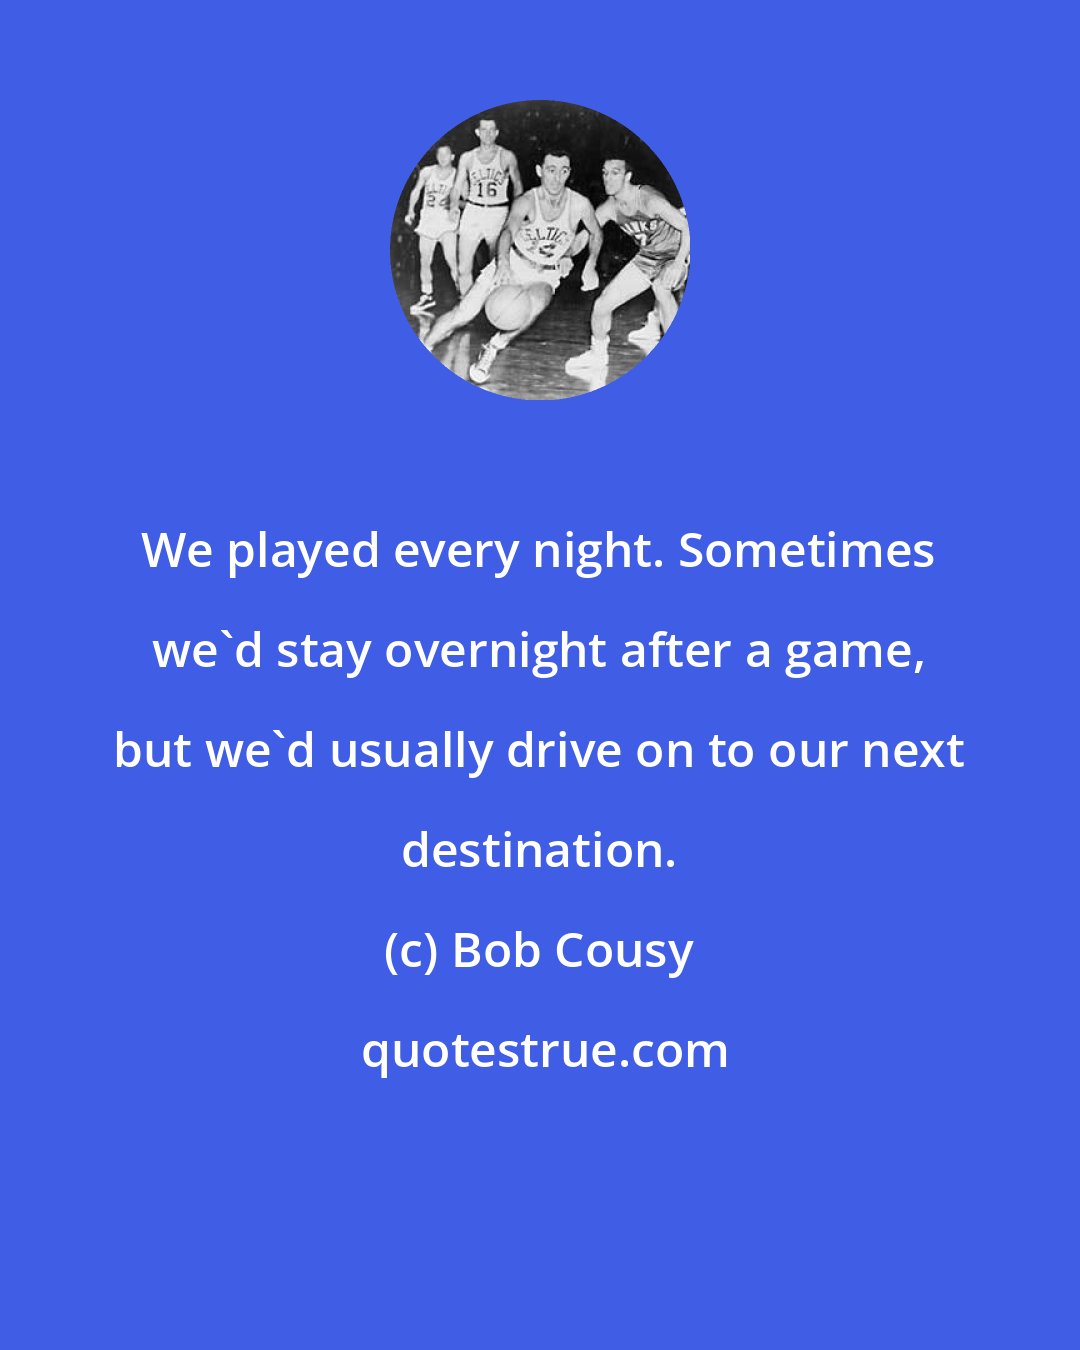 Bob Cousy: We played every night. Sometimes we'd stay overnight after a game, but we'd usually drive on to our next destination.